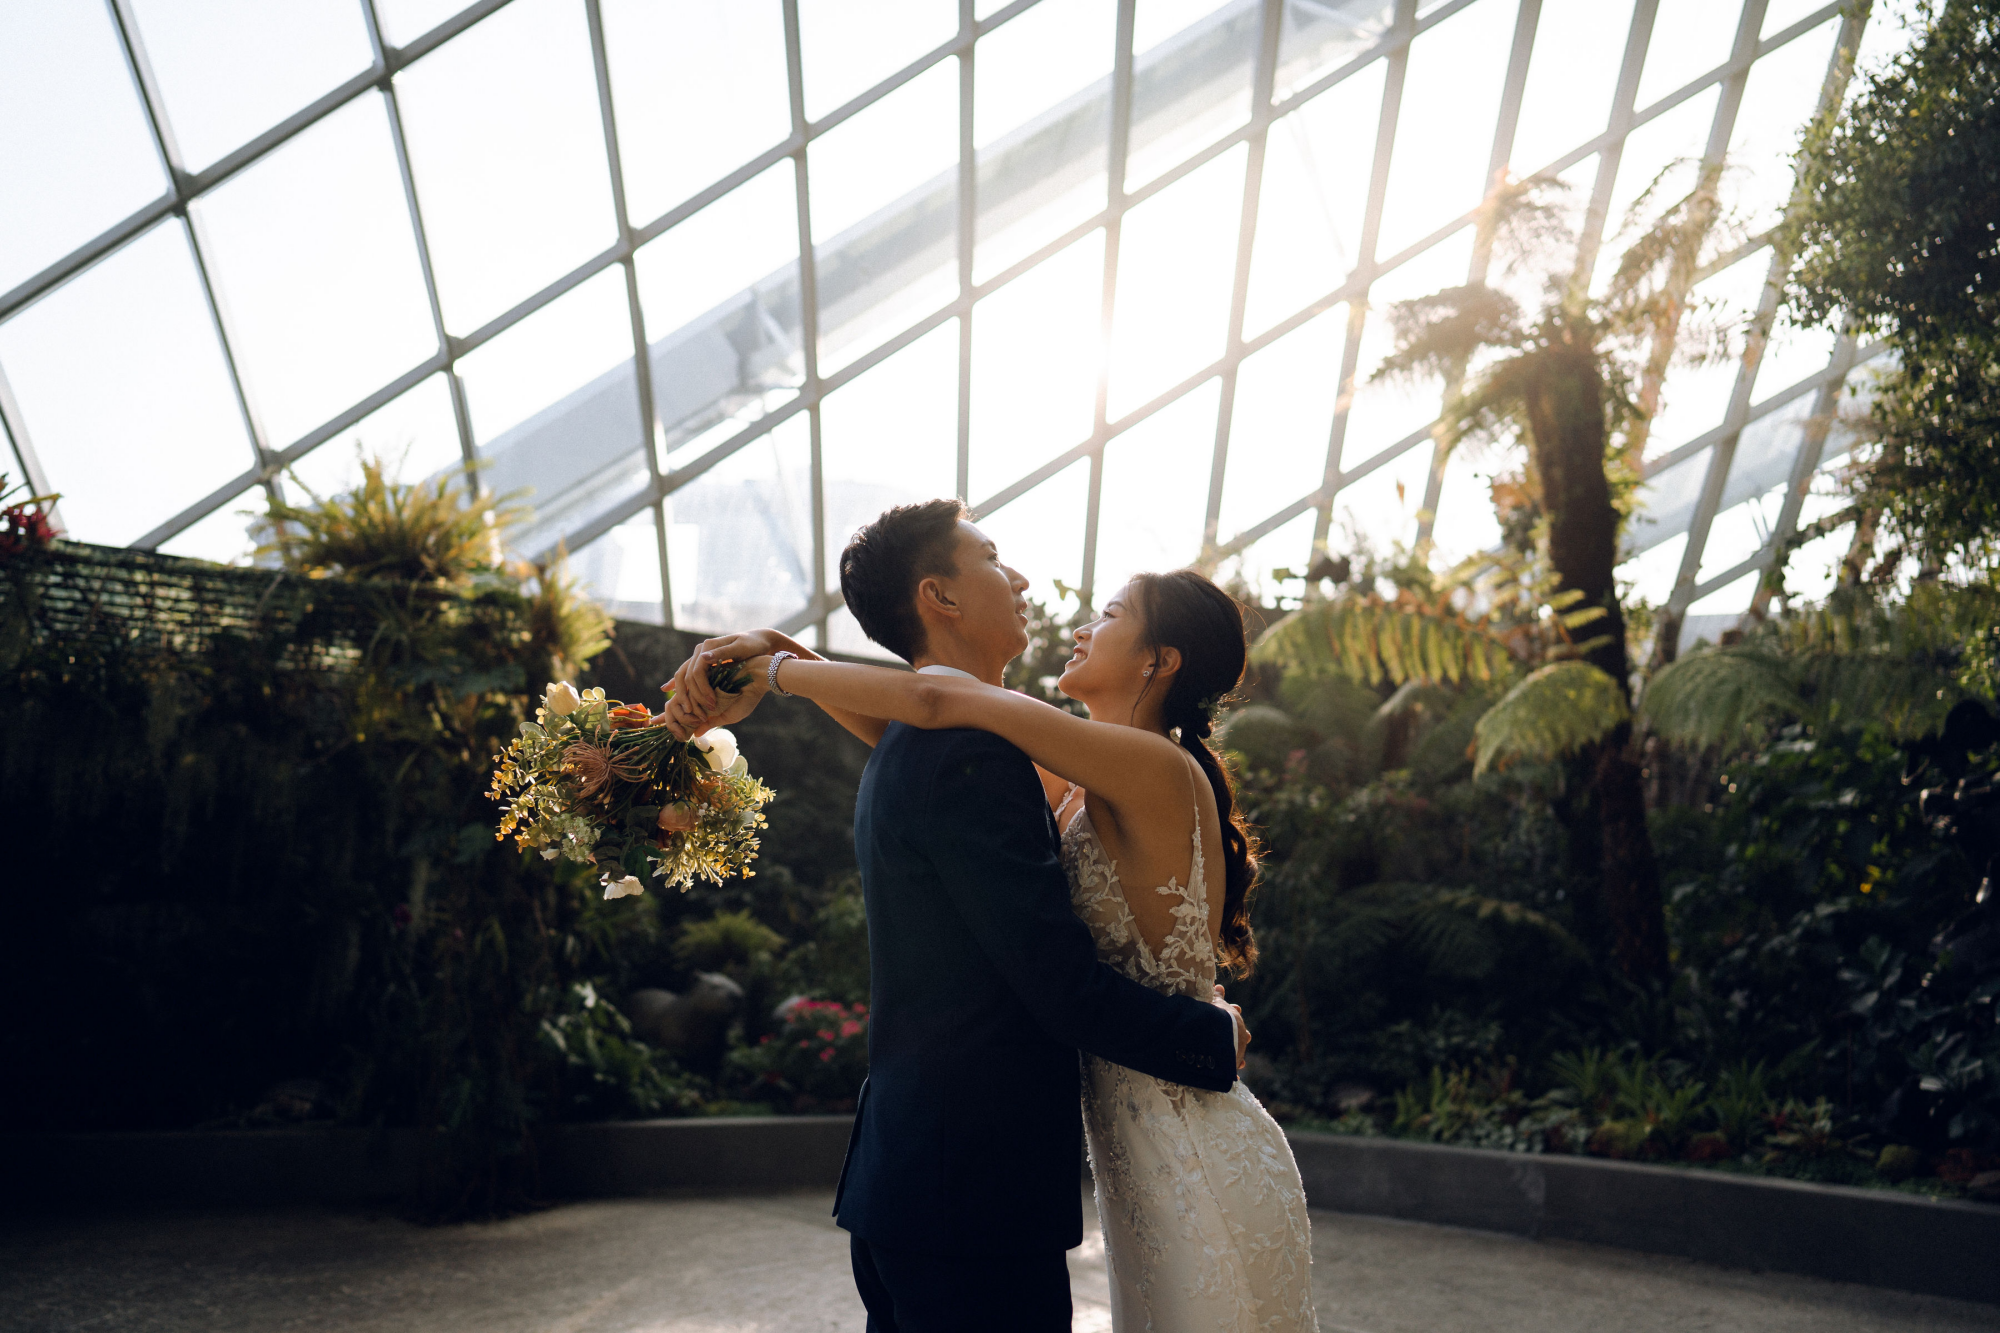 Sunset Prewedding Photoshoot At Cloud Forest, Gardens By The Bay  by Samantha on OneThreeOneFour 11